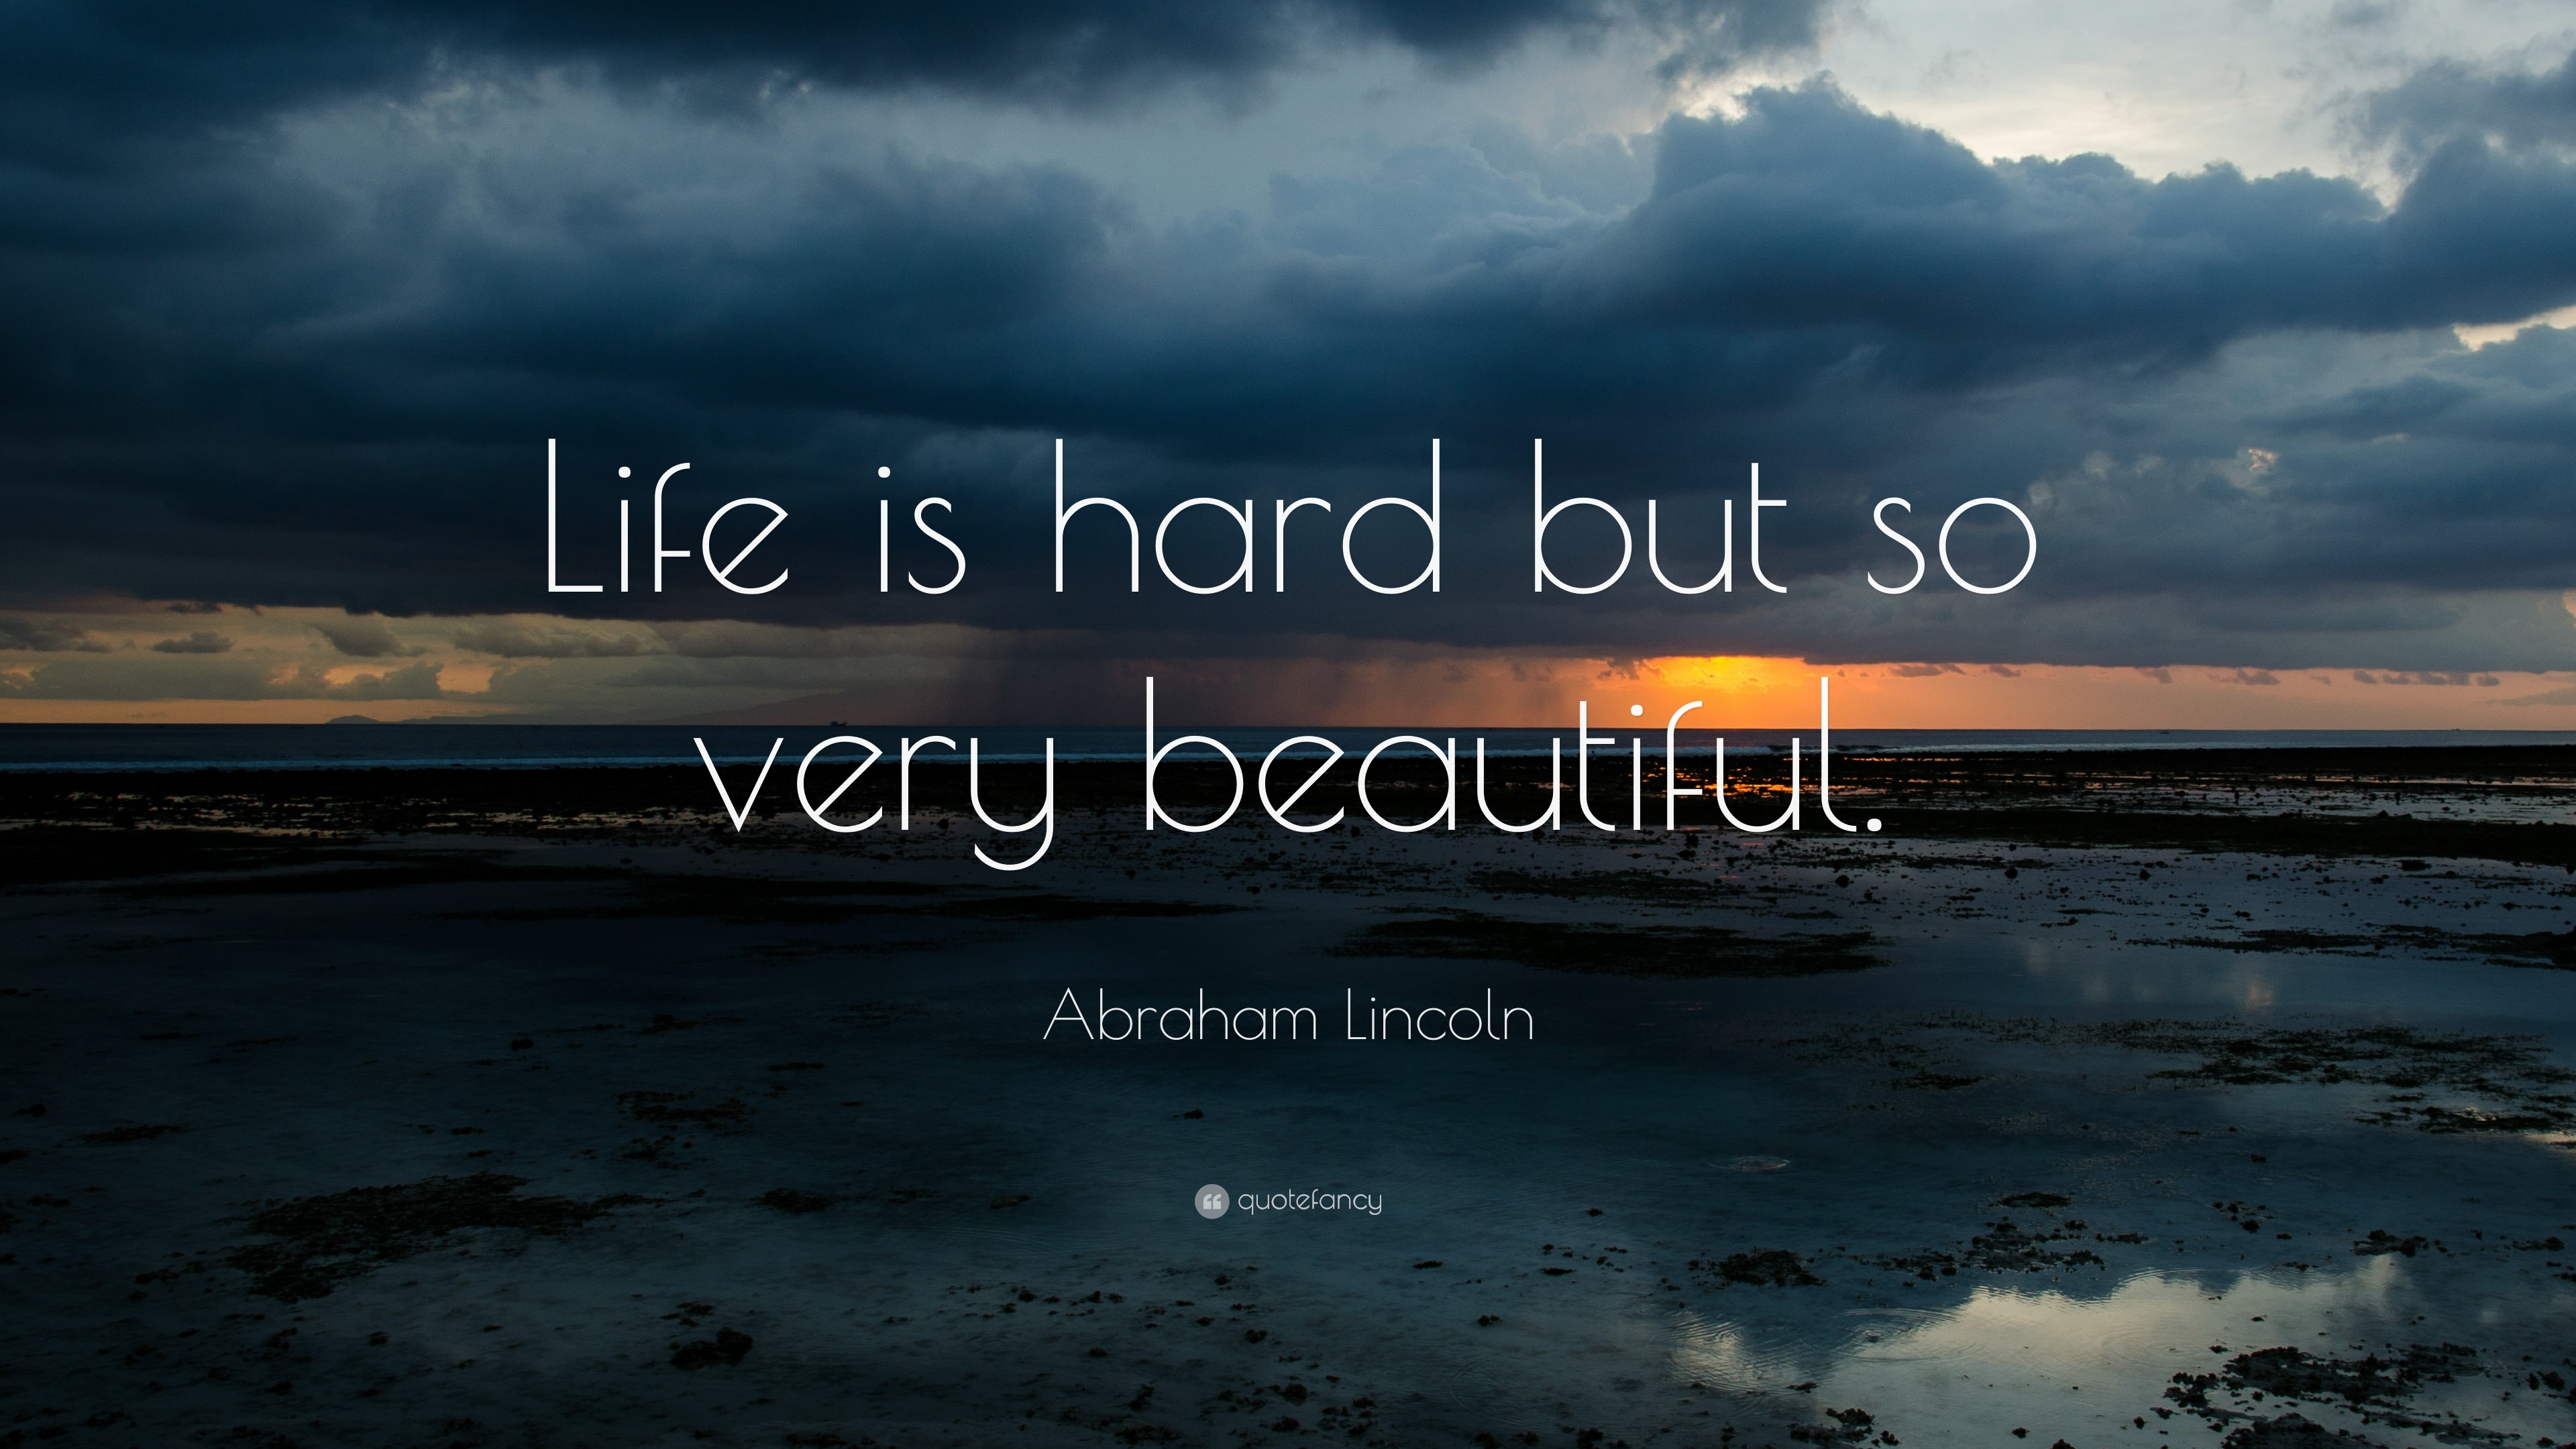 3840x2160 ... Beautiful Life Quote Wallpaper - Android Apps on Google Play ...